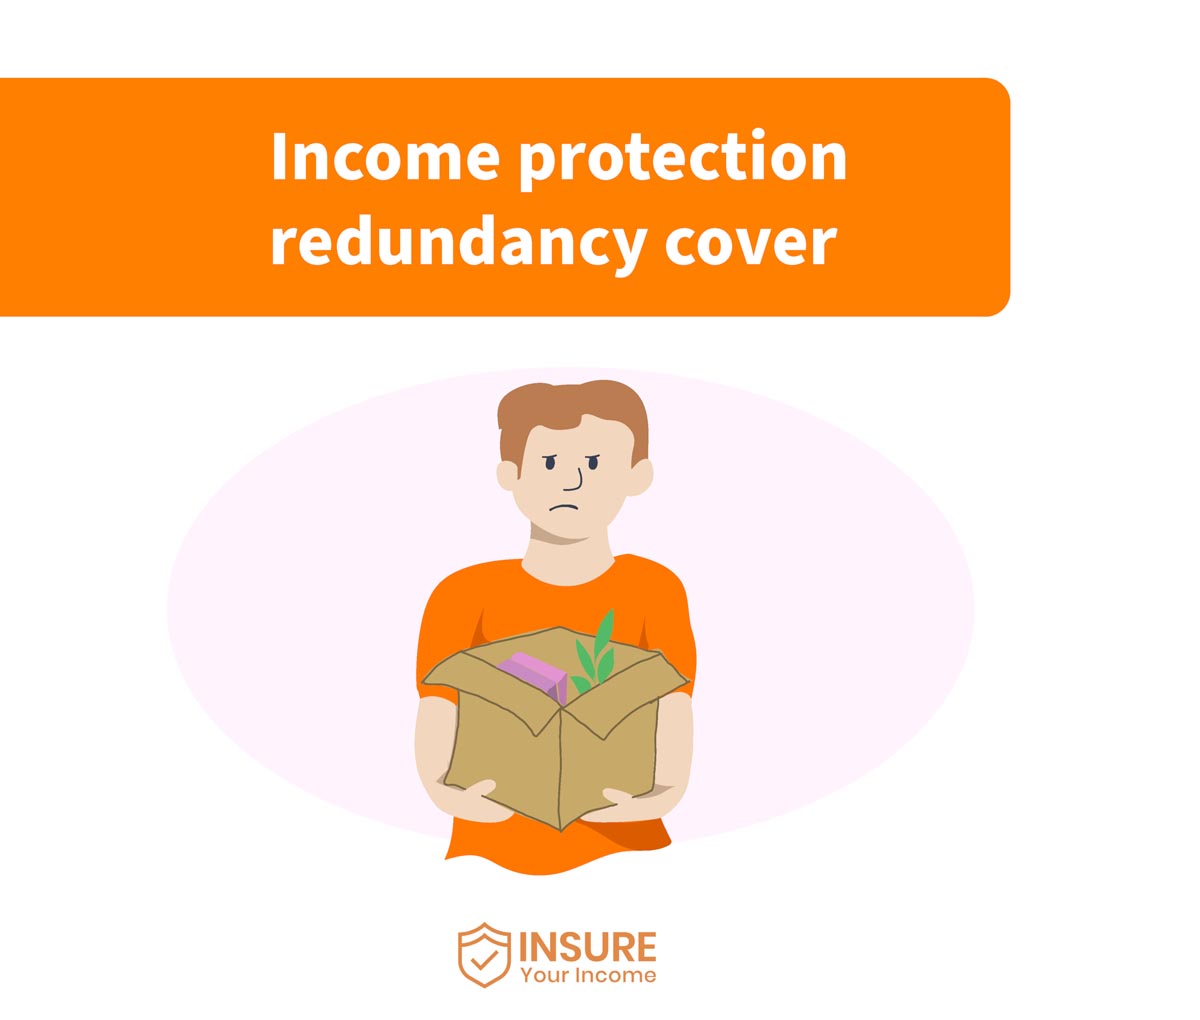 Does income protection cover redundancy leave 